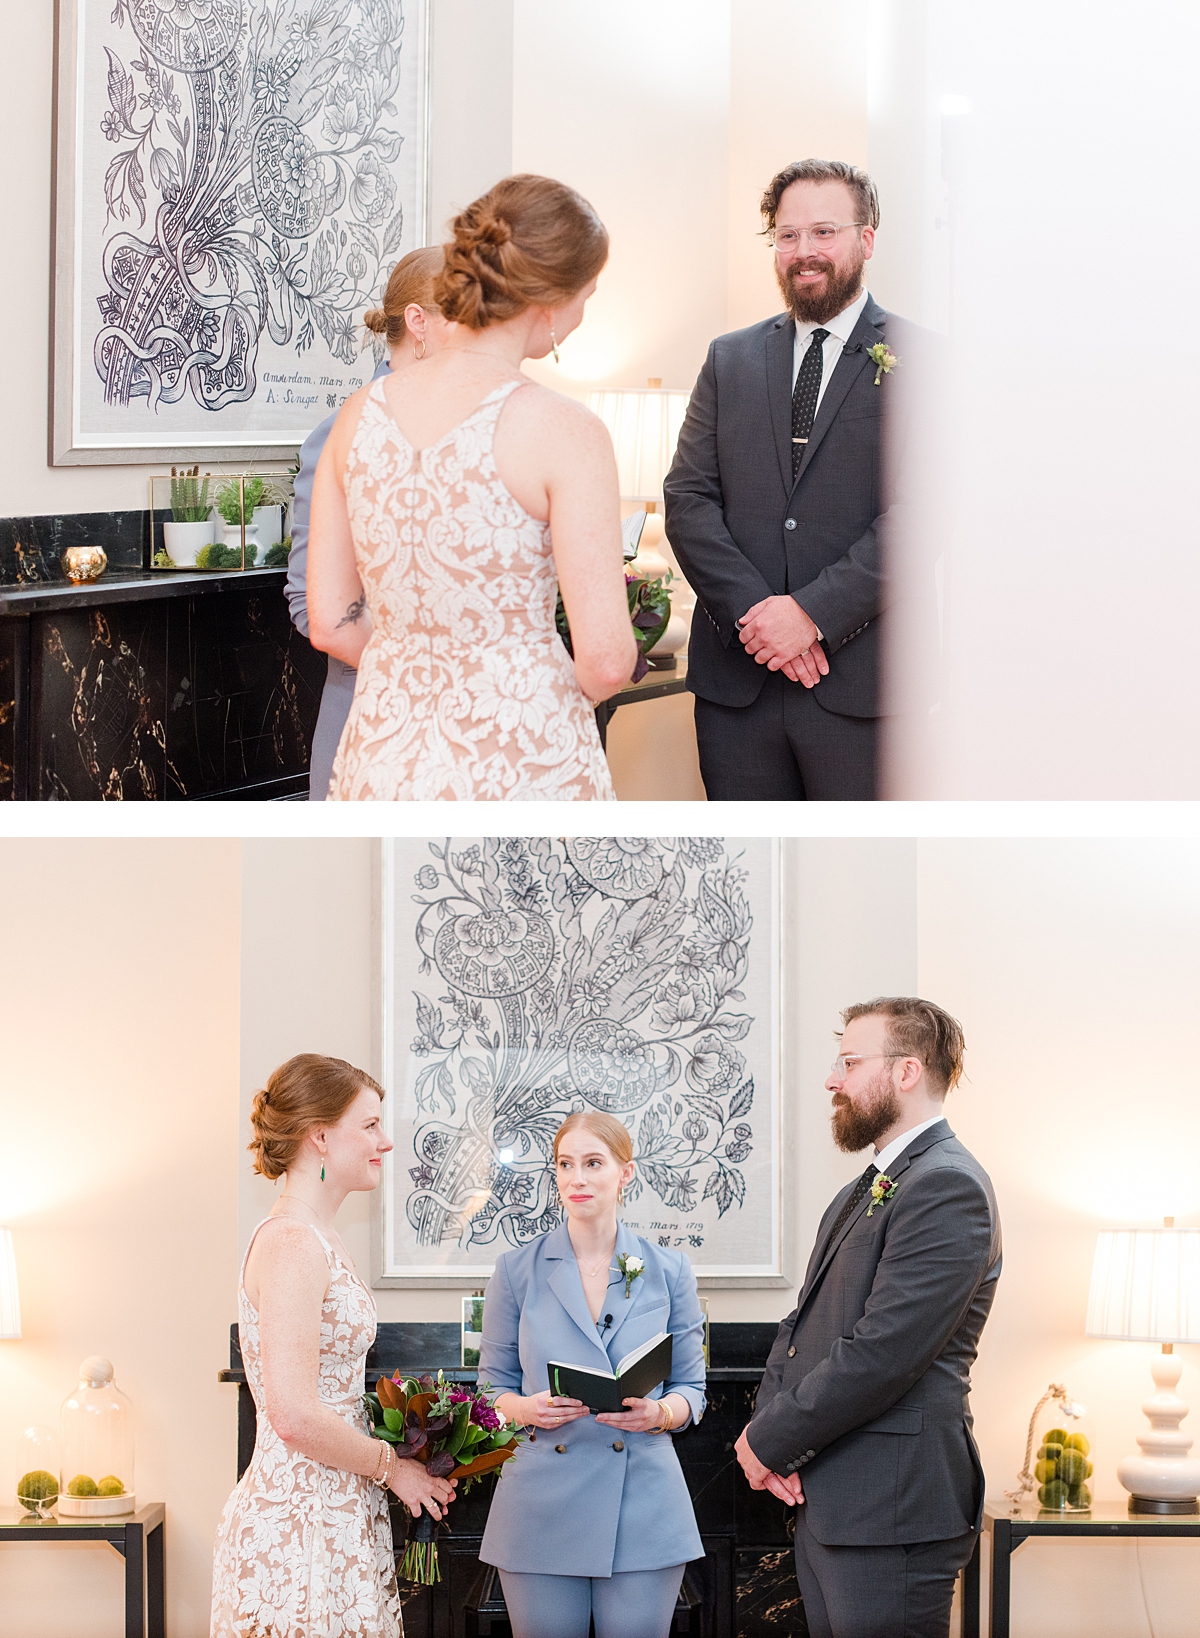 Exchanging Vows at Intimate Richmond Elopement Ceremony. Wedding Photography by Richmond Wedding Photographer Kailey Brianne Photography. 